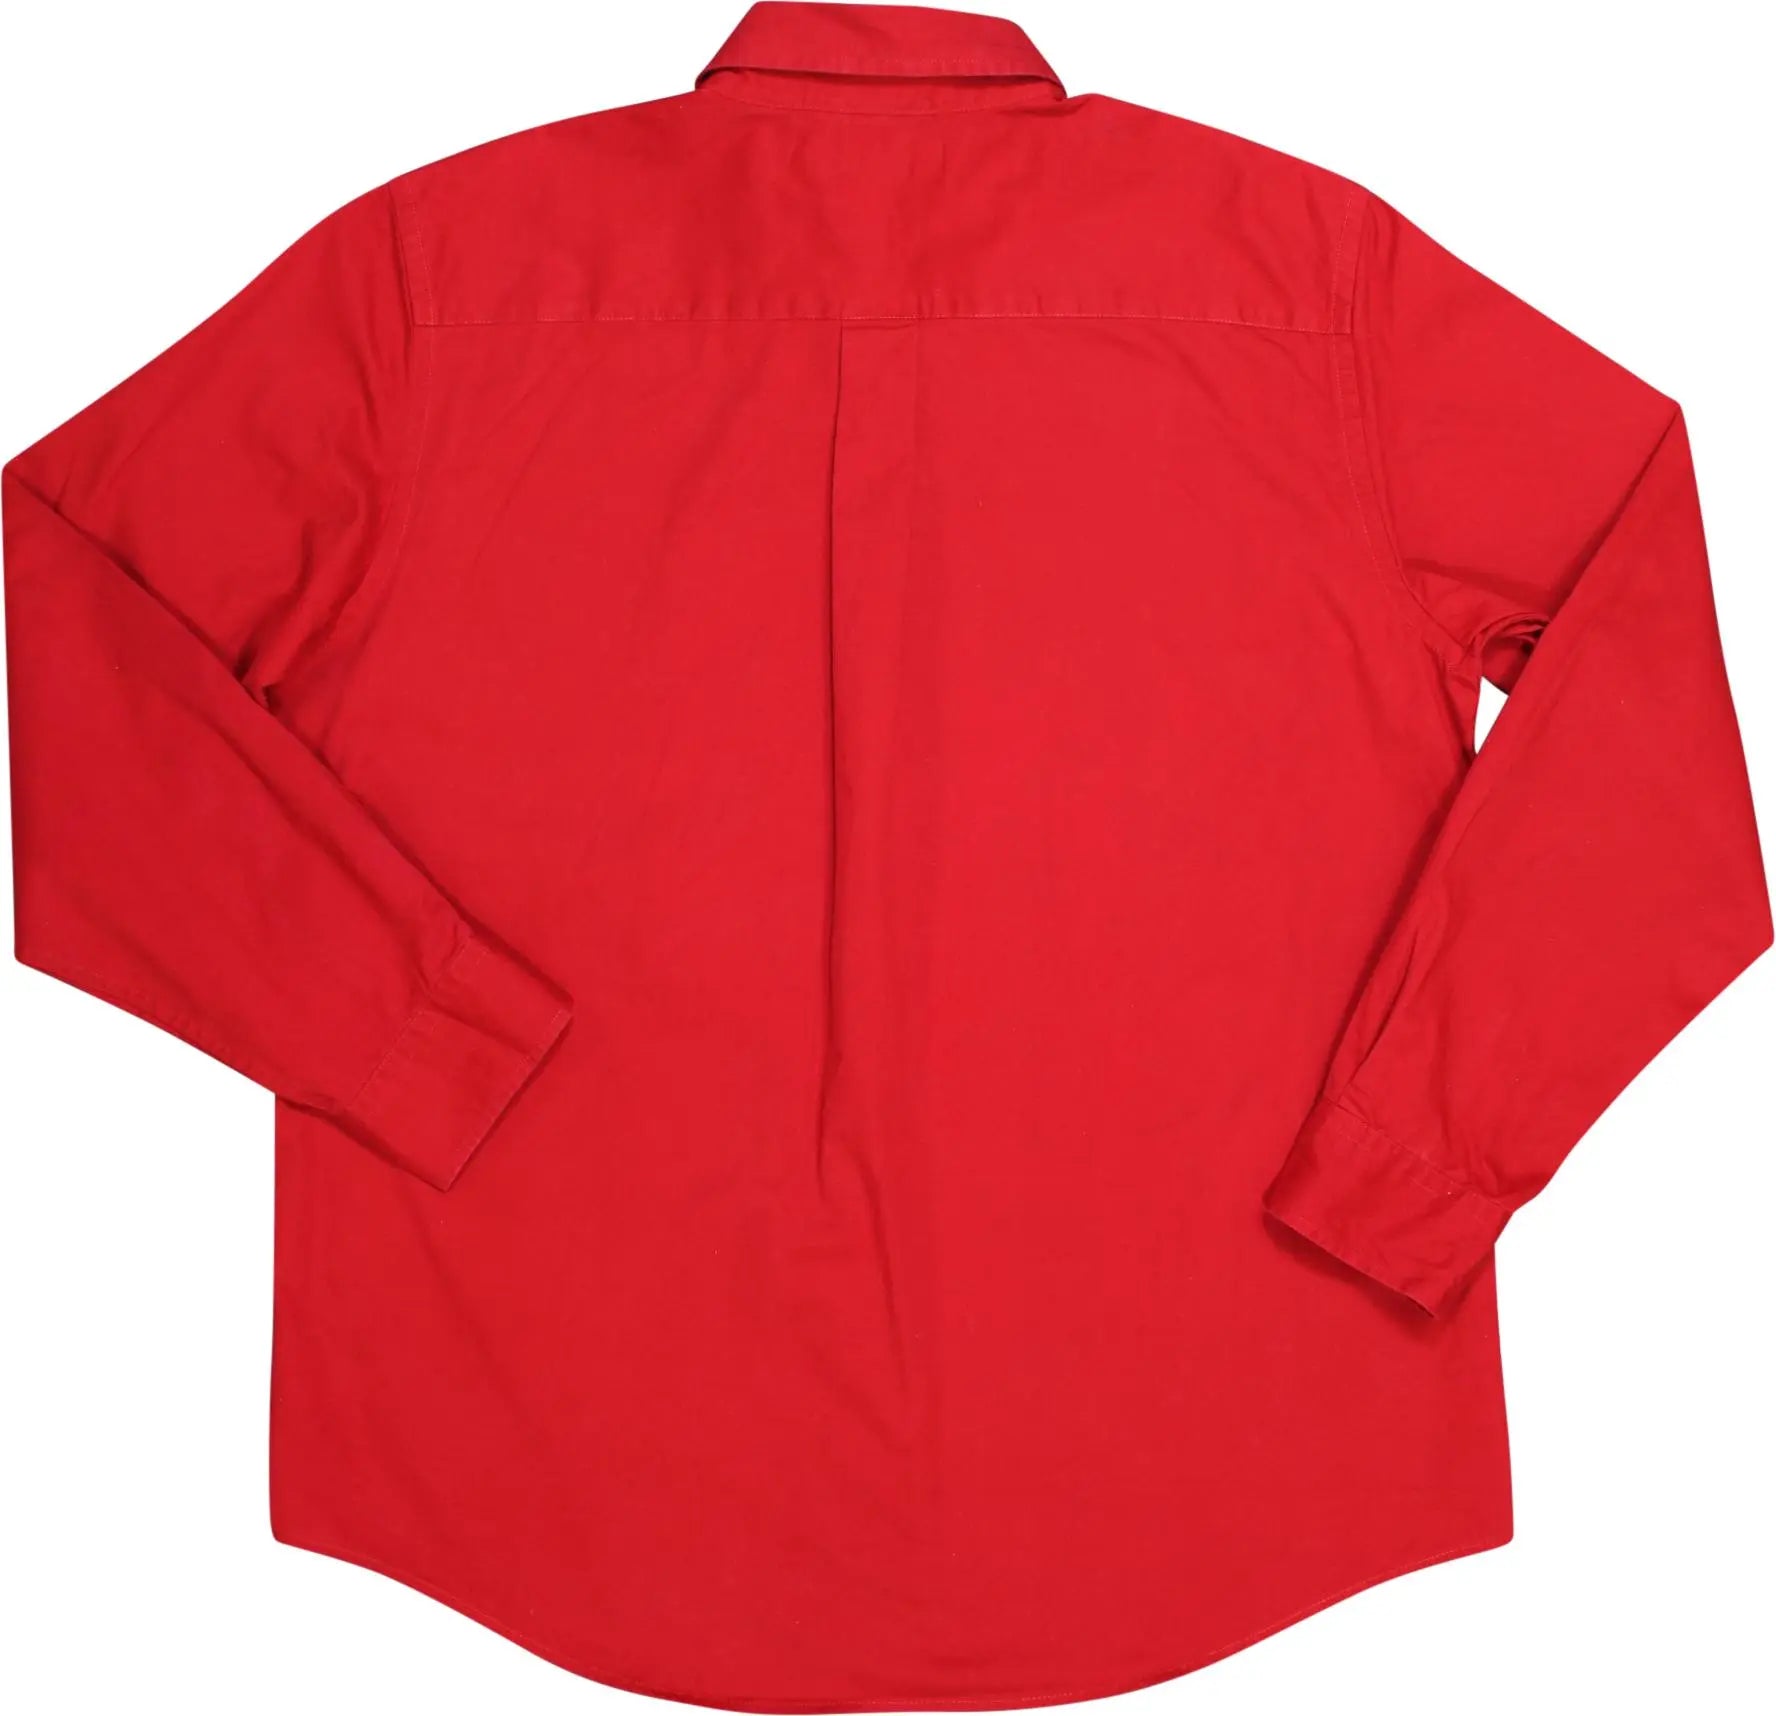 Chaps Ralph Lauren - Red Shirt by Chaps Ralph Lauren- ThriftTale.com - Vintage and second handclothing